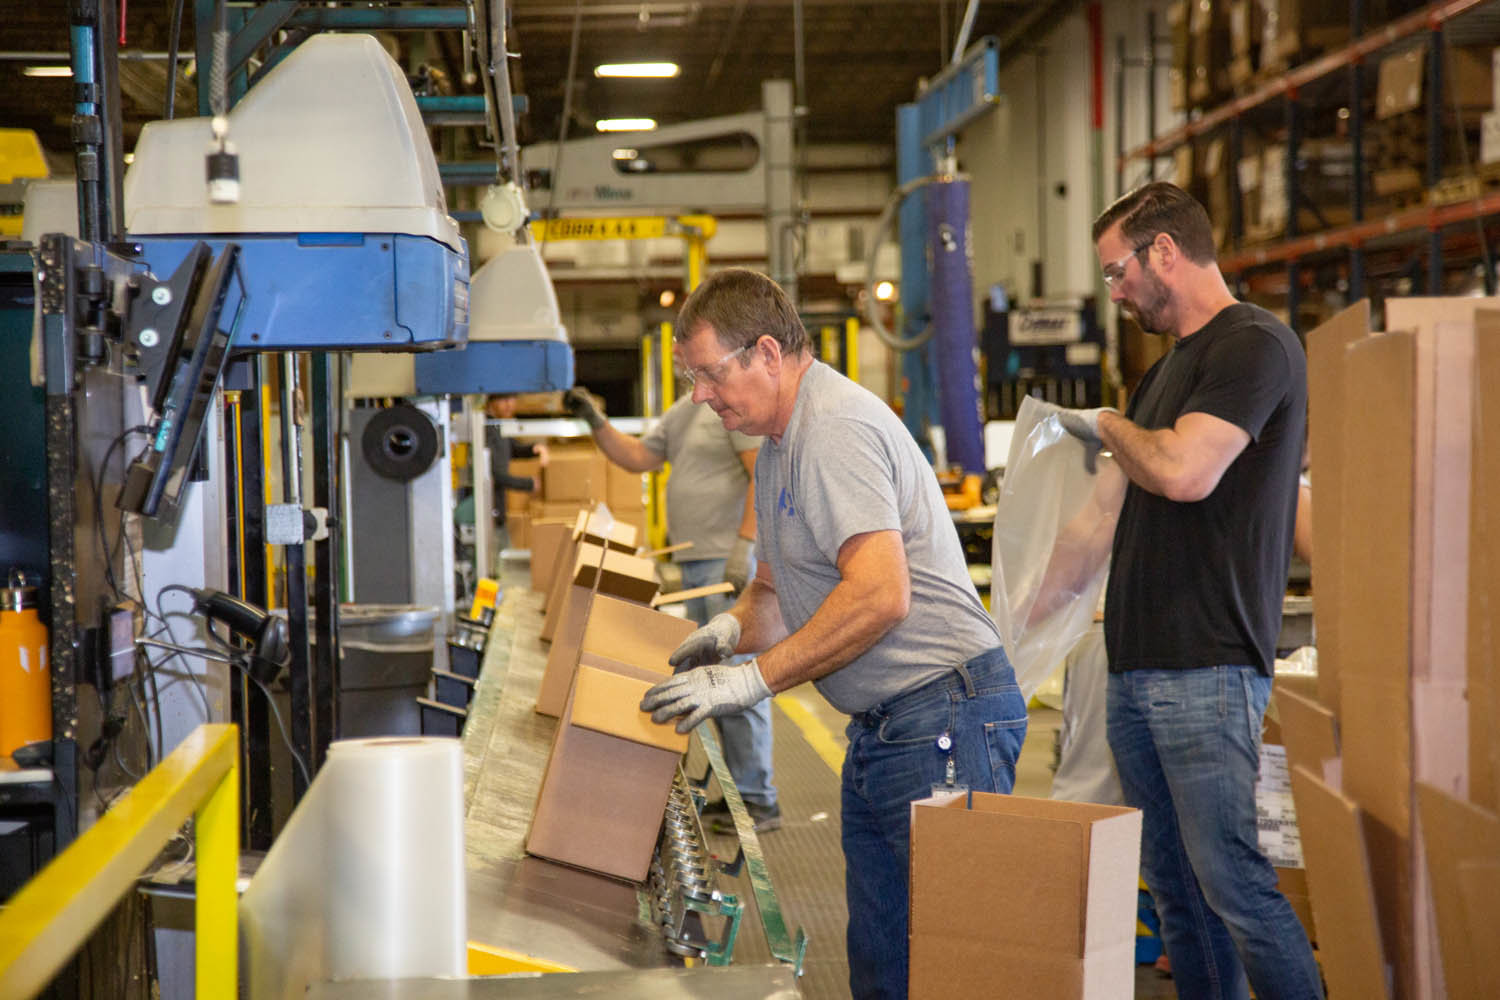 IN OPERATION: NewStream Enterprises workers Mark Lehman, left, and Tad Hutchens package products in the company’s warehouse in the former Solo Cup building.